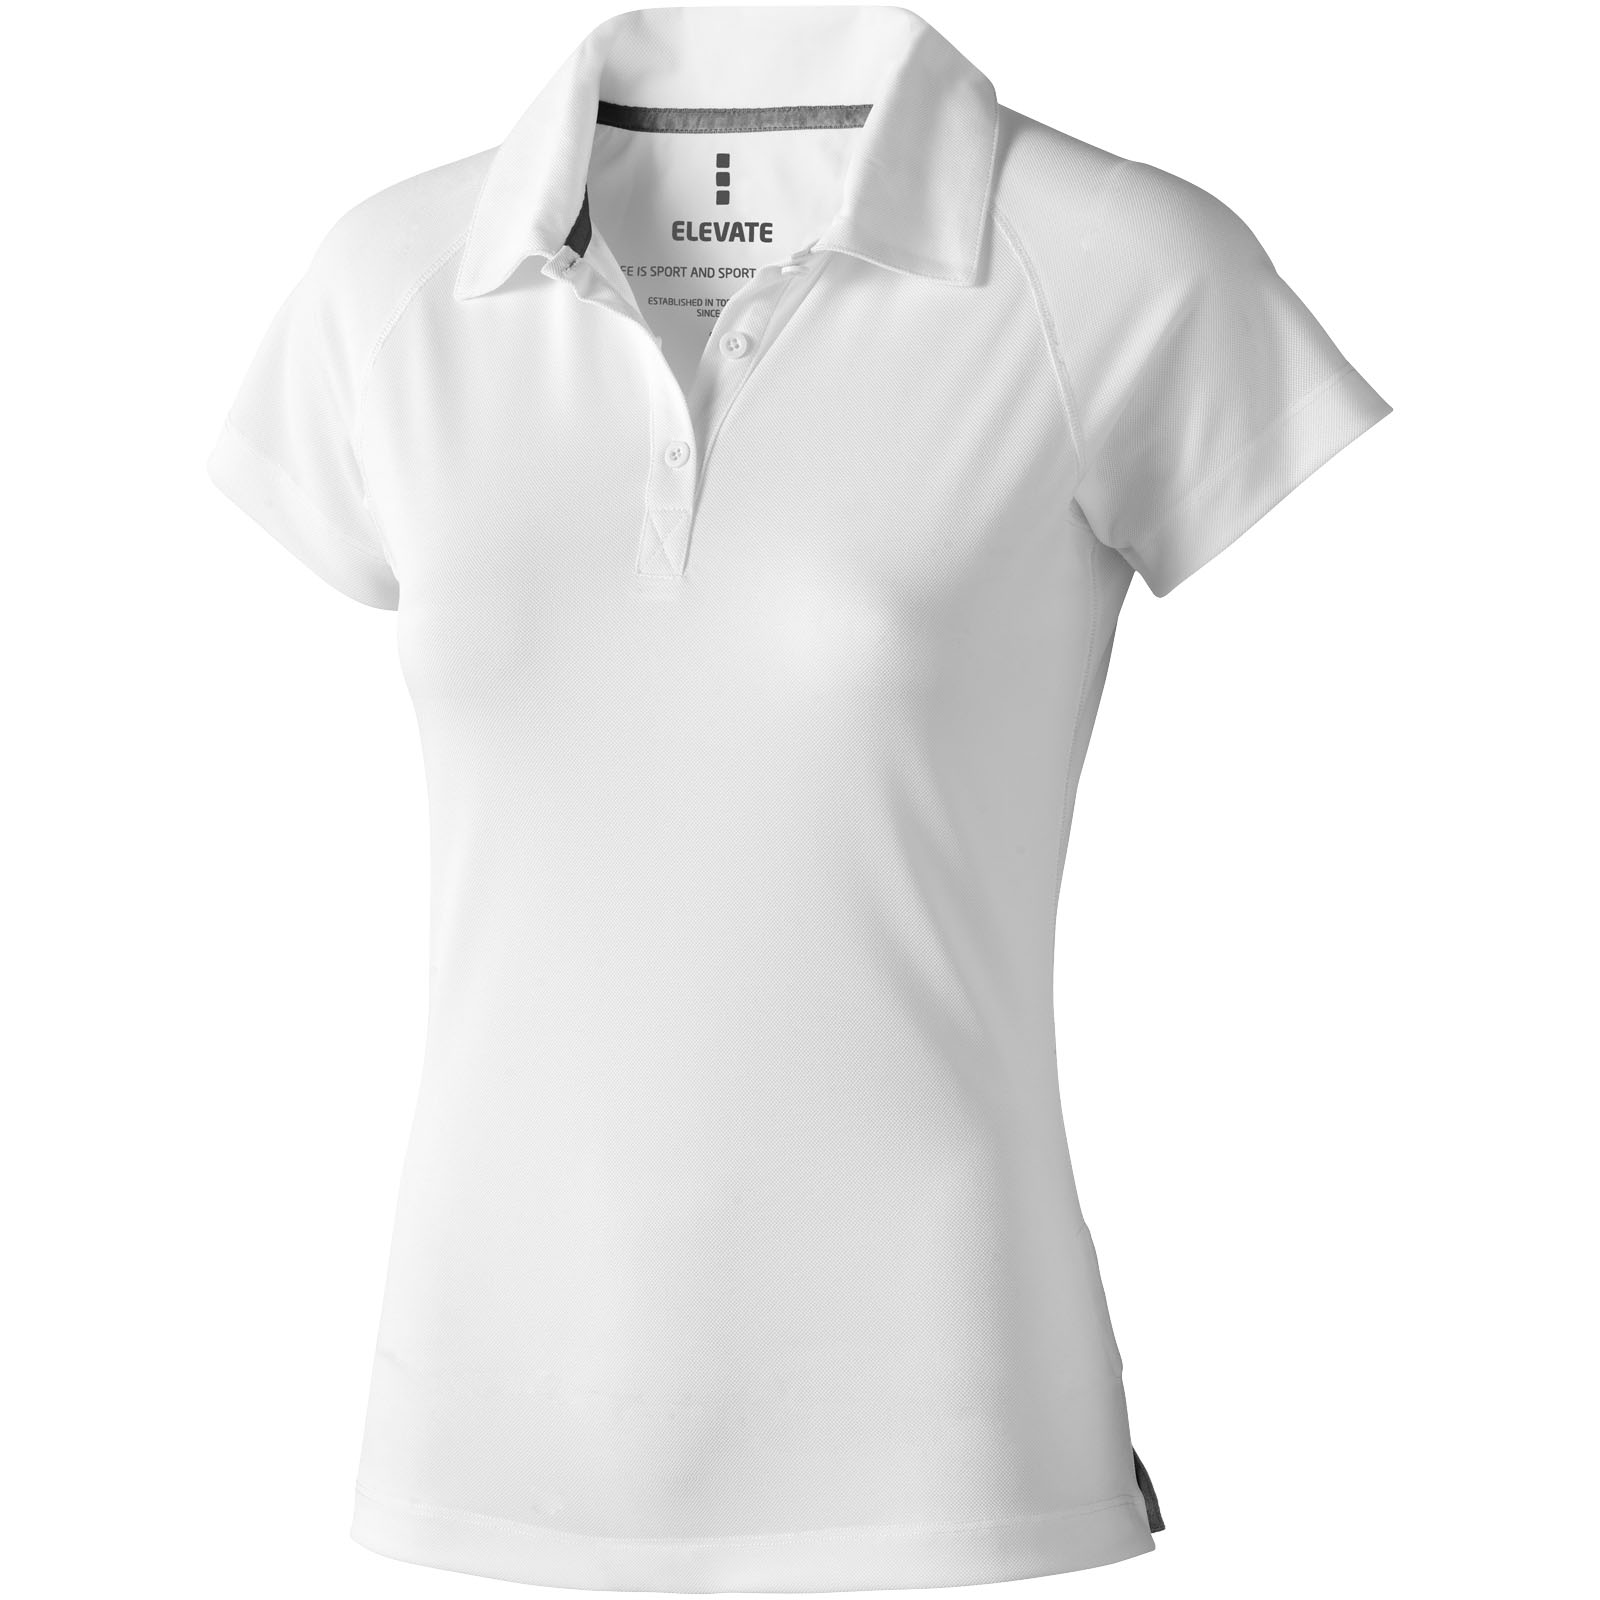 Polos - Ottawa short sleeve women's cool fit polo